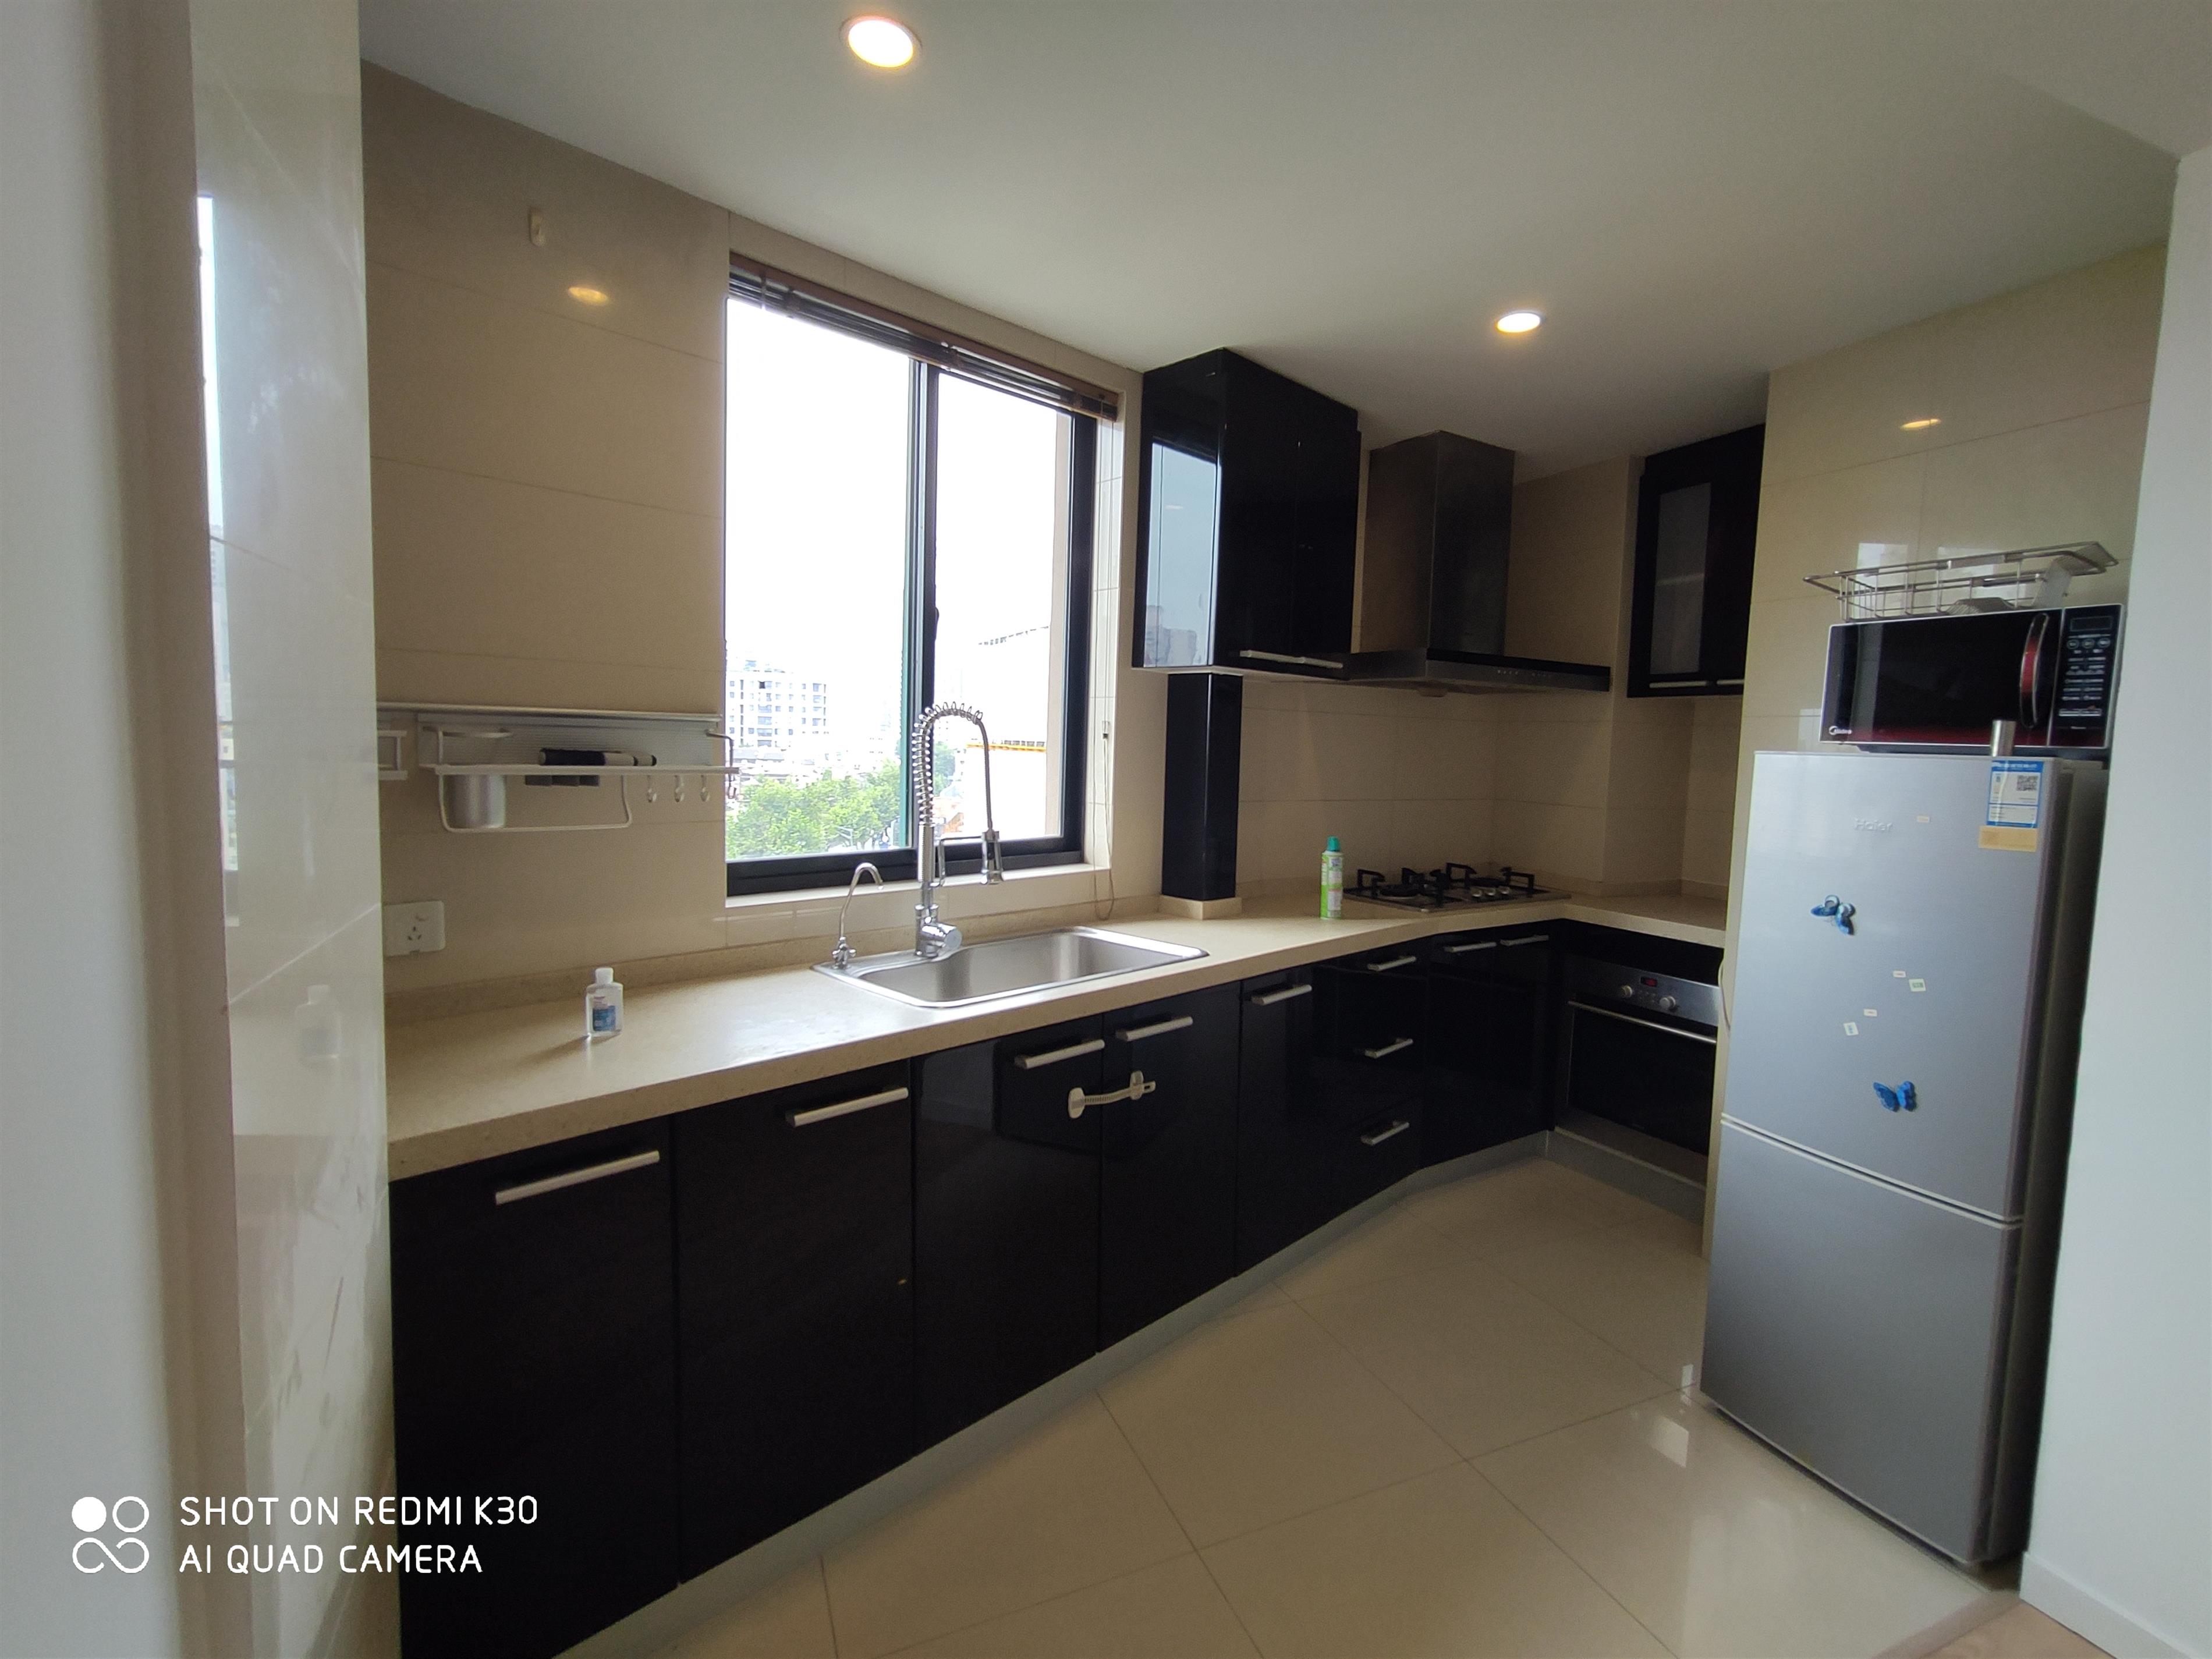 open Kitchen Newly Renovated Spacious Convenient 3BR FFC Apartment nr LN 8/9/10/13 for Rent in Shanghai